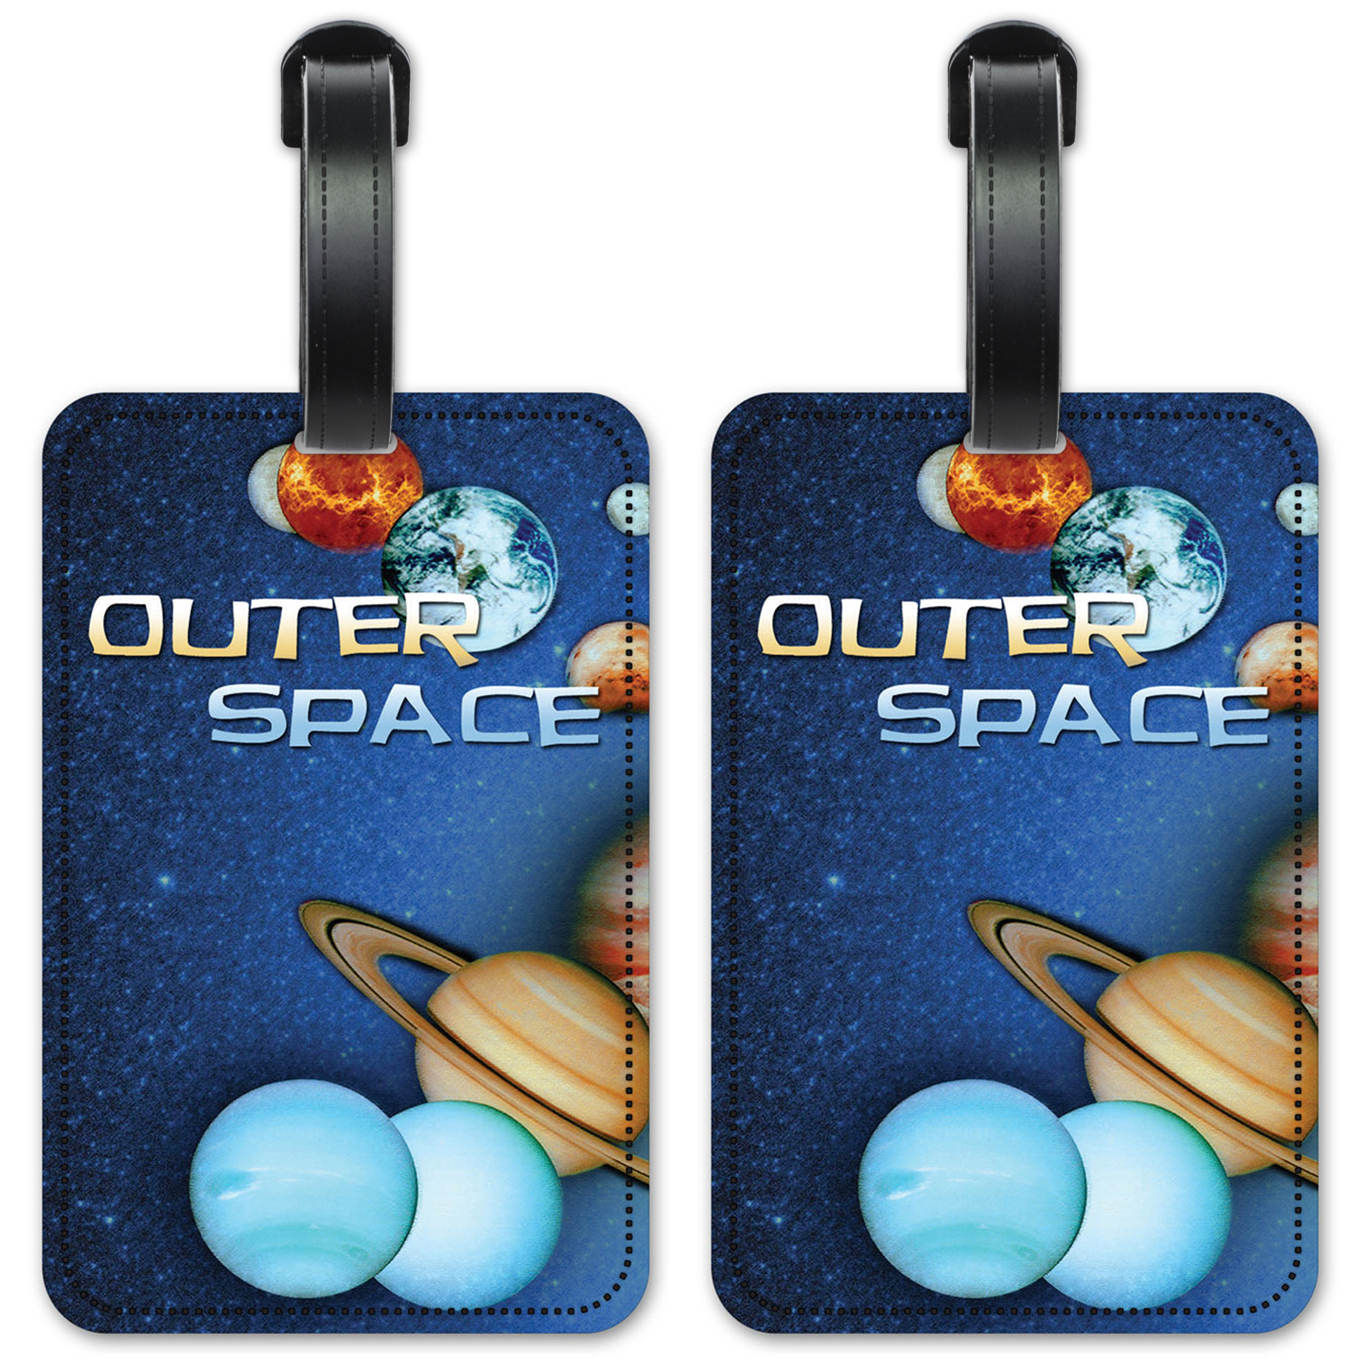 Outer Space - #262